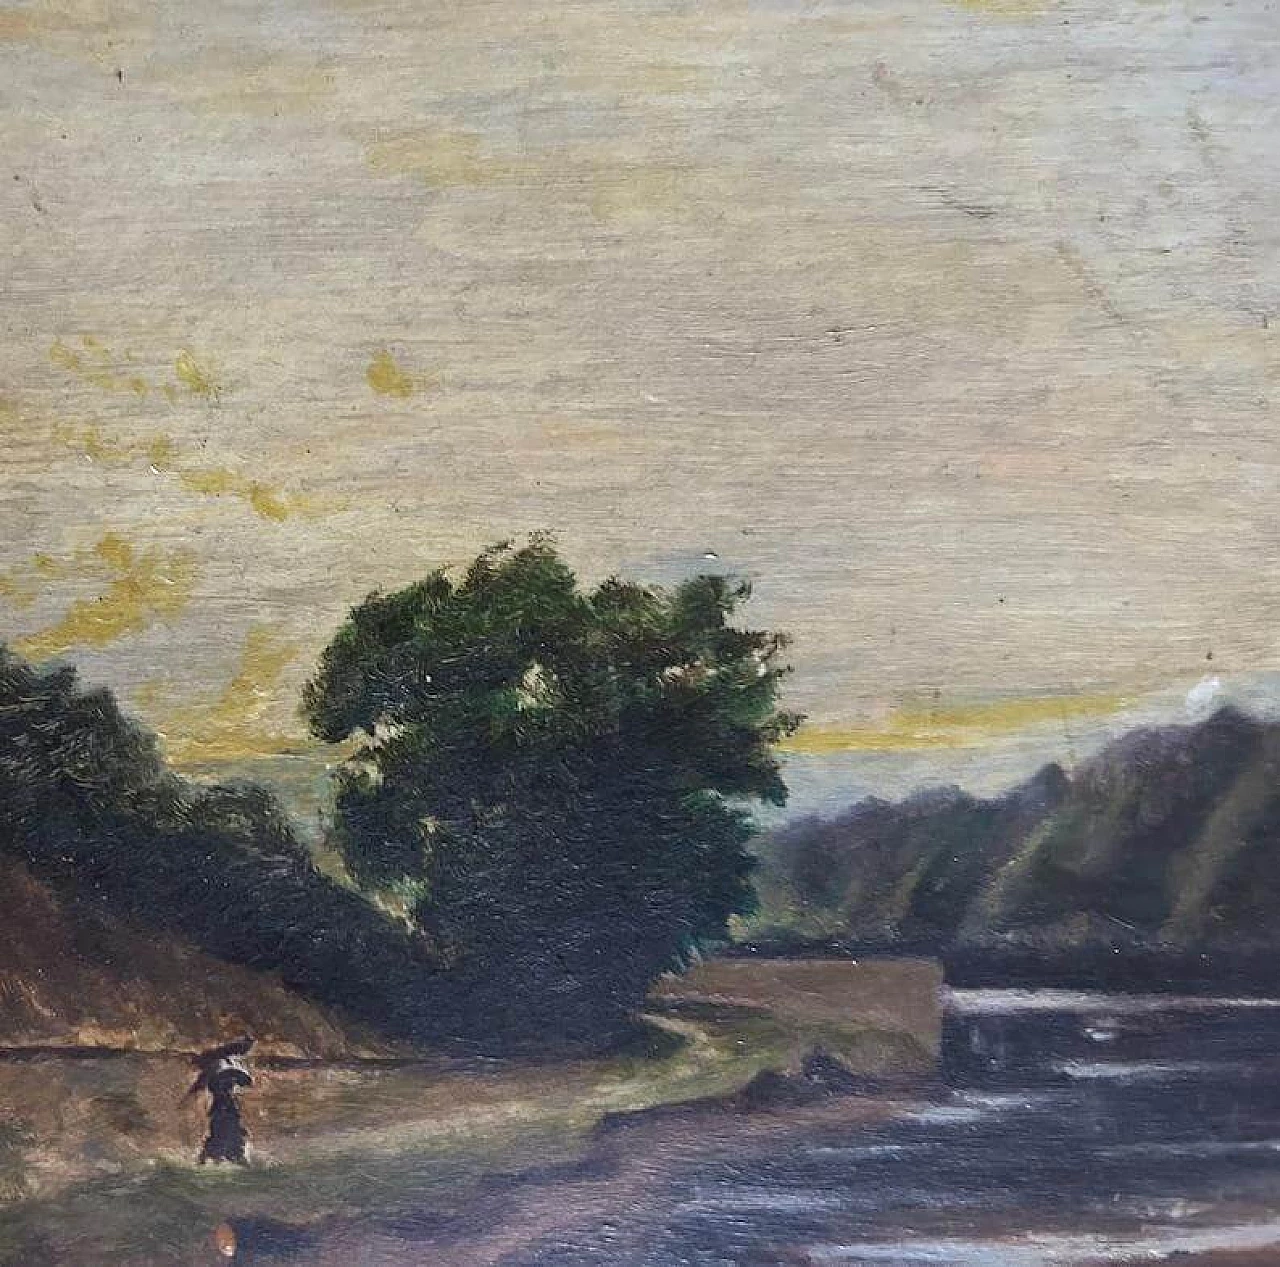 Lake landscape in the style of the Barbizon School, painting, 1920s 11